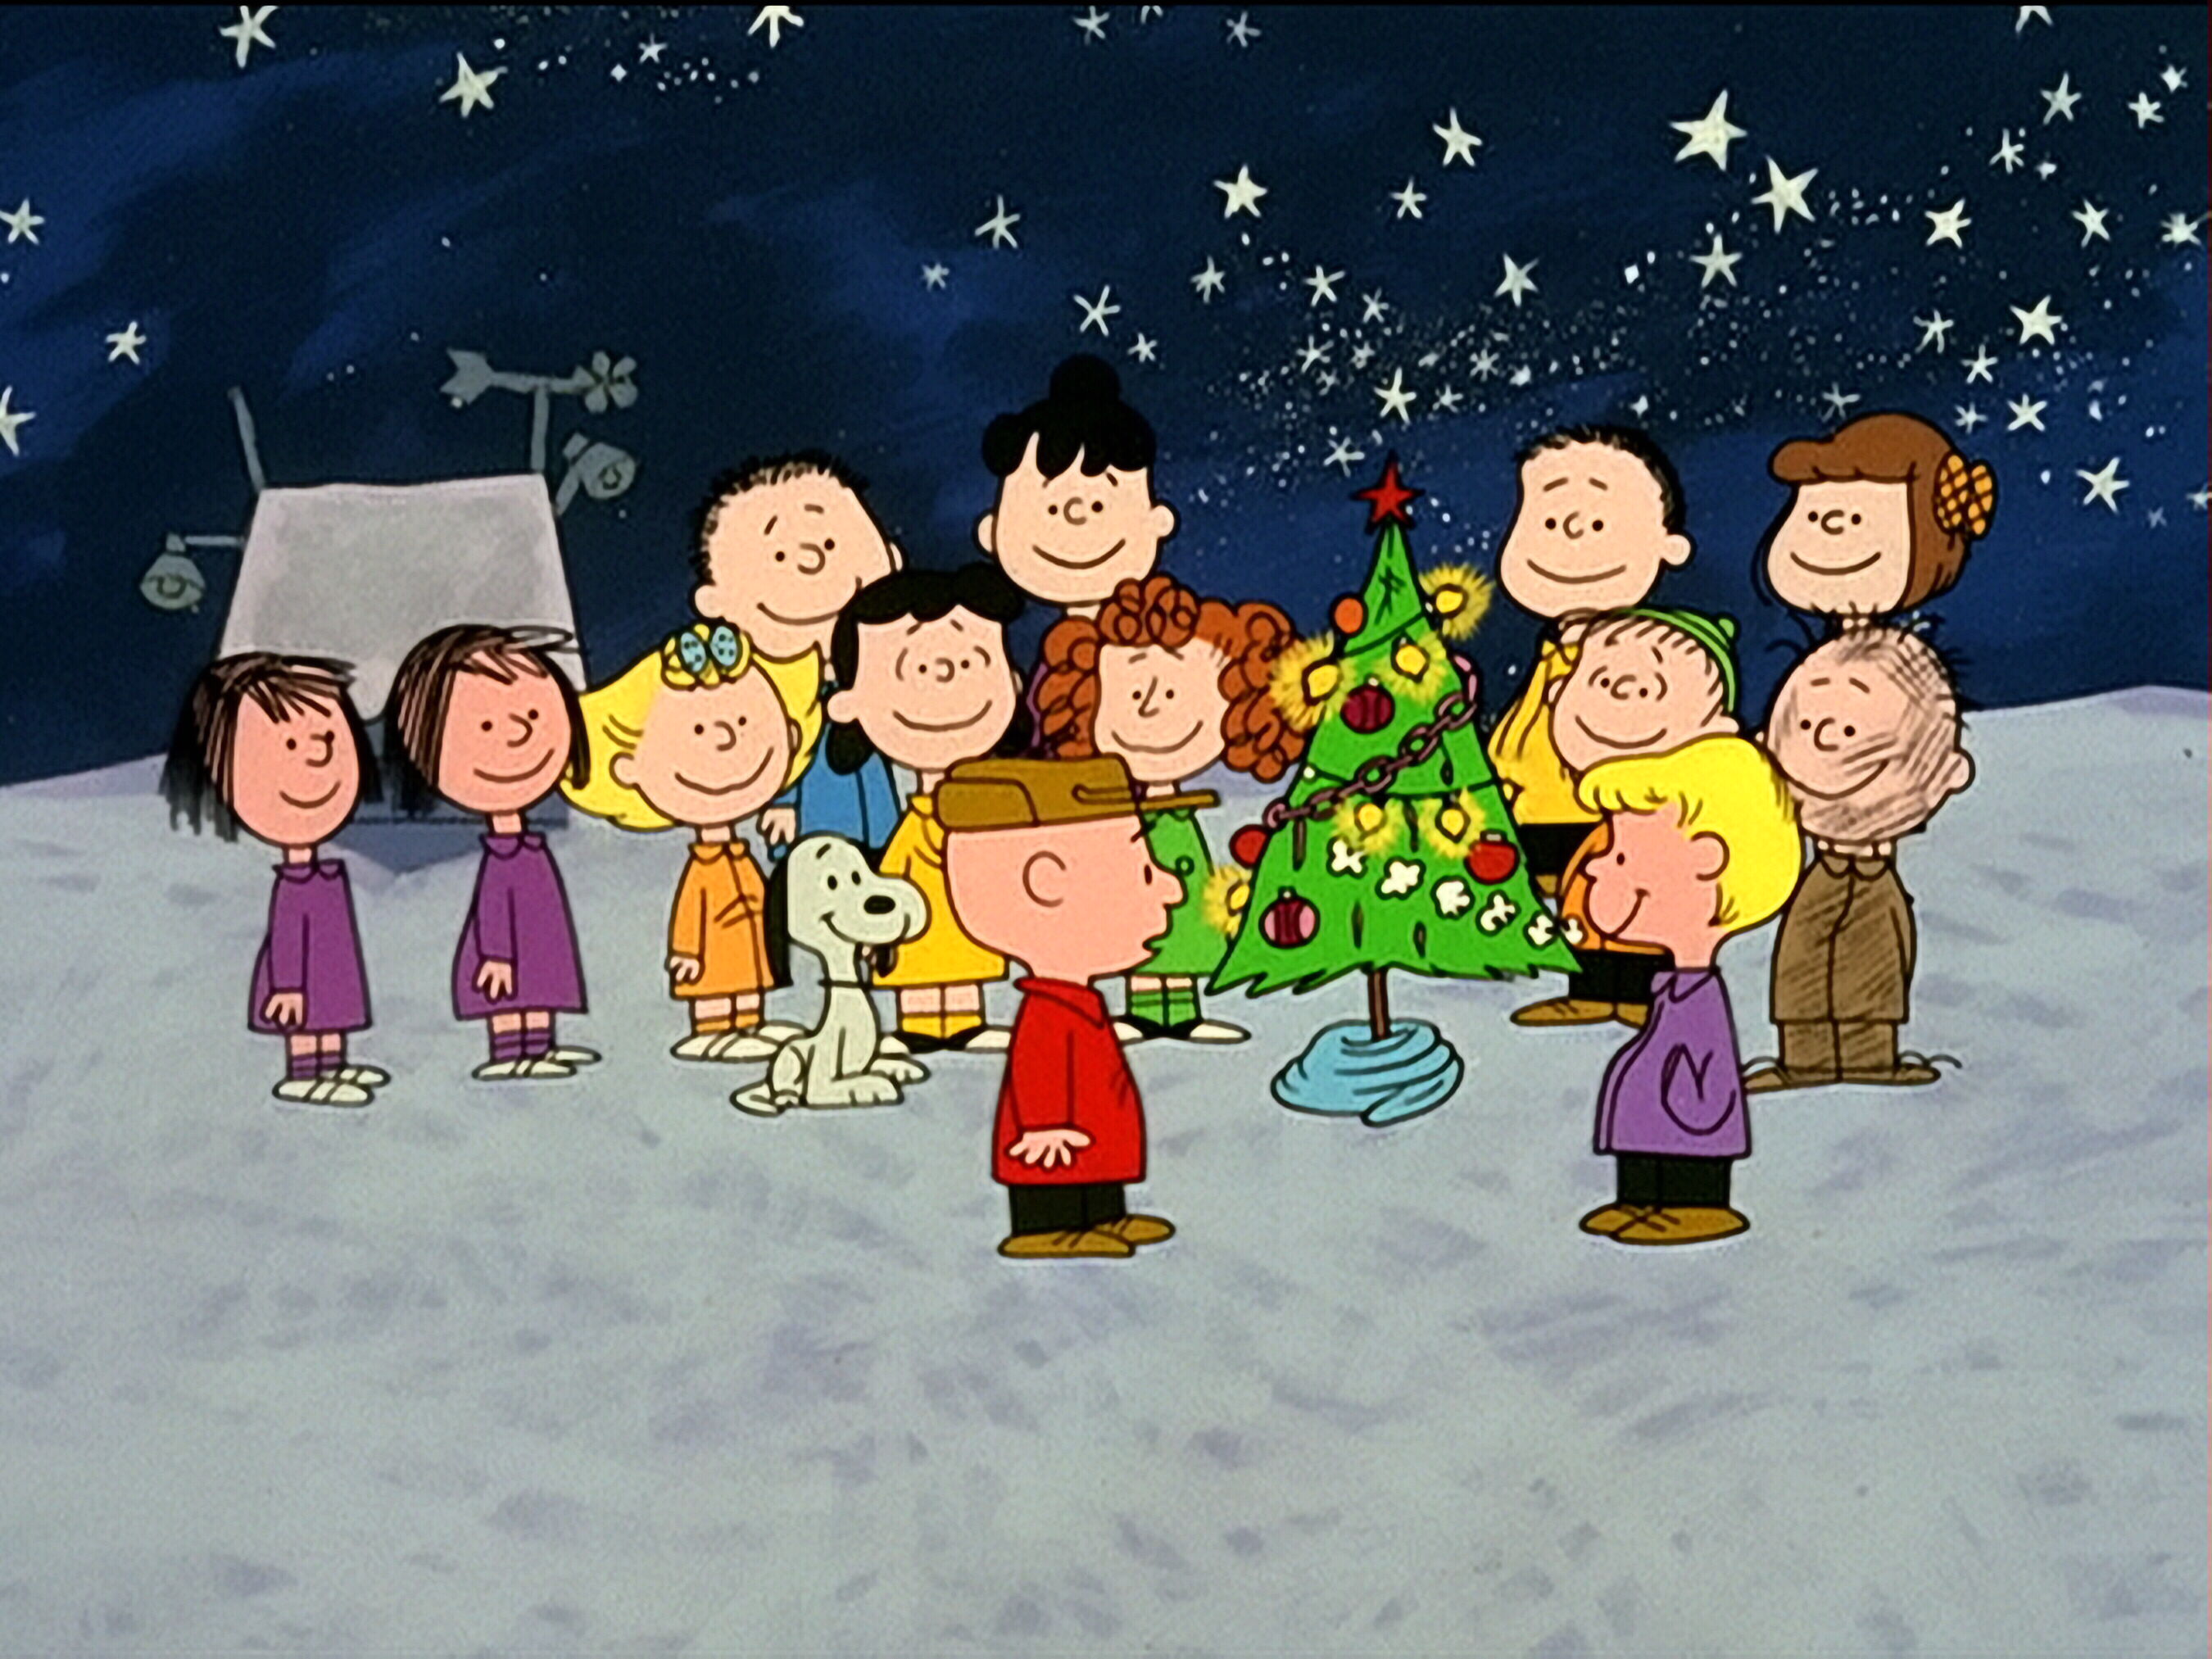 Free download Charlie Brown Christmas Peanuts Wiki [2700x2025] for your Desktop, Mobile & Tablet. Explore Peanuts Characters Wallpaper. Free Peanuts Desktop Wallpaper, Peanuts Gang Fall Wallpaper, Peanuts Holiday Wallpaper